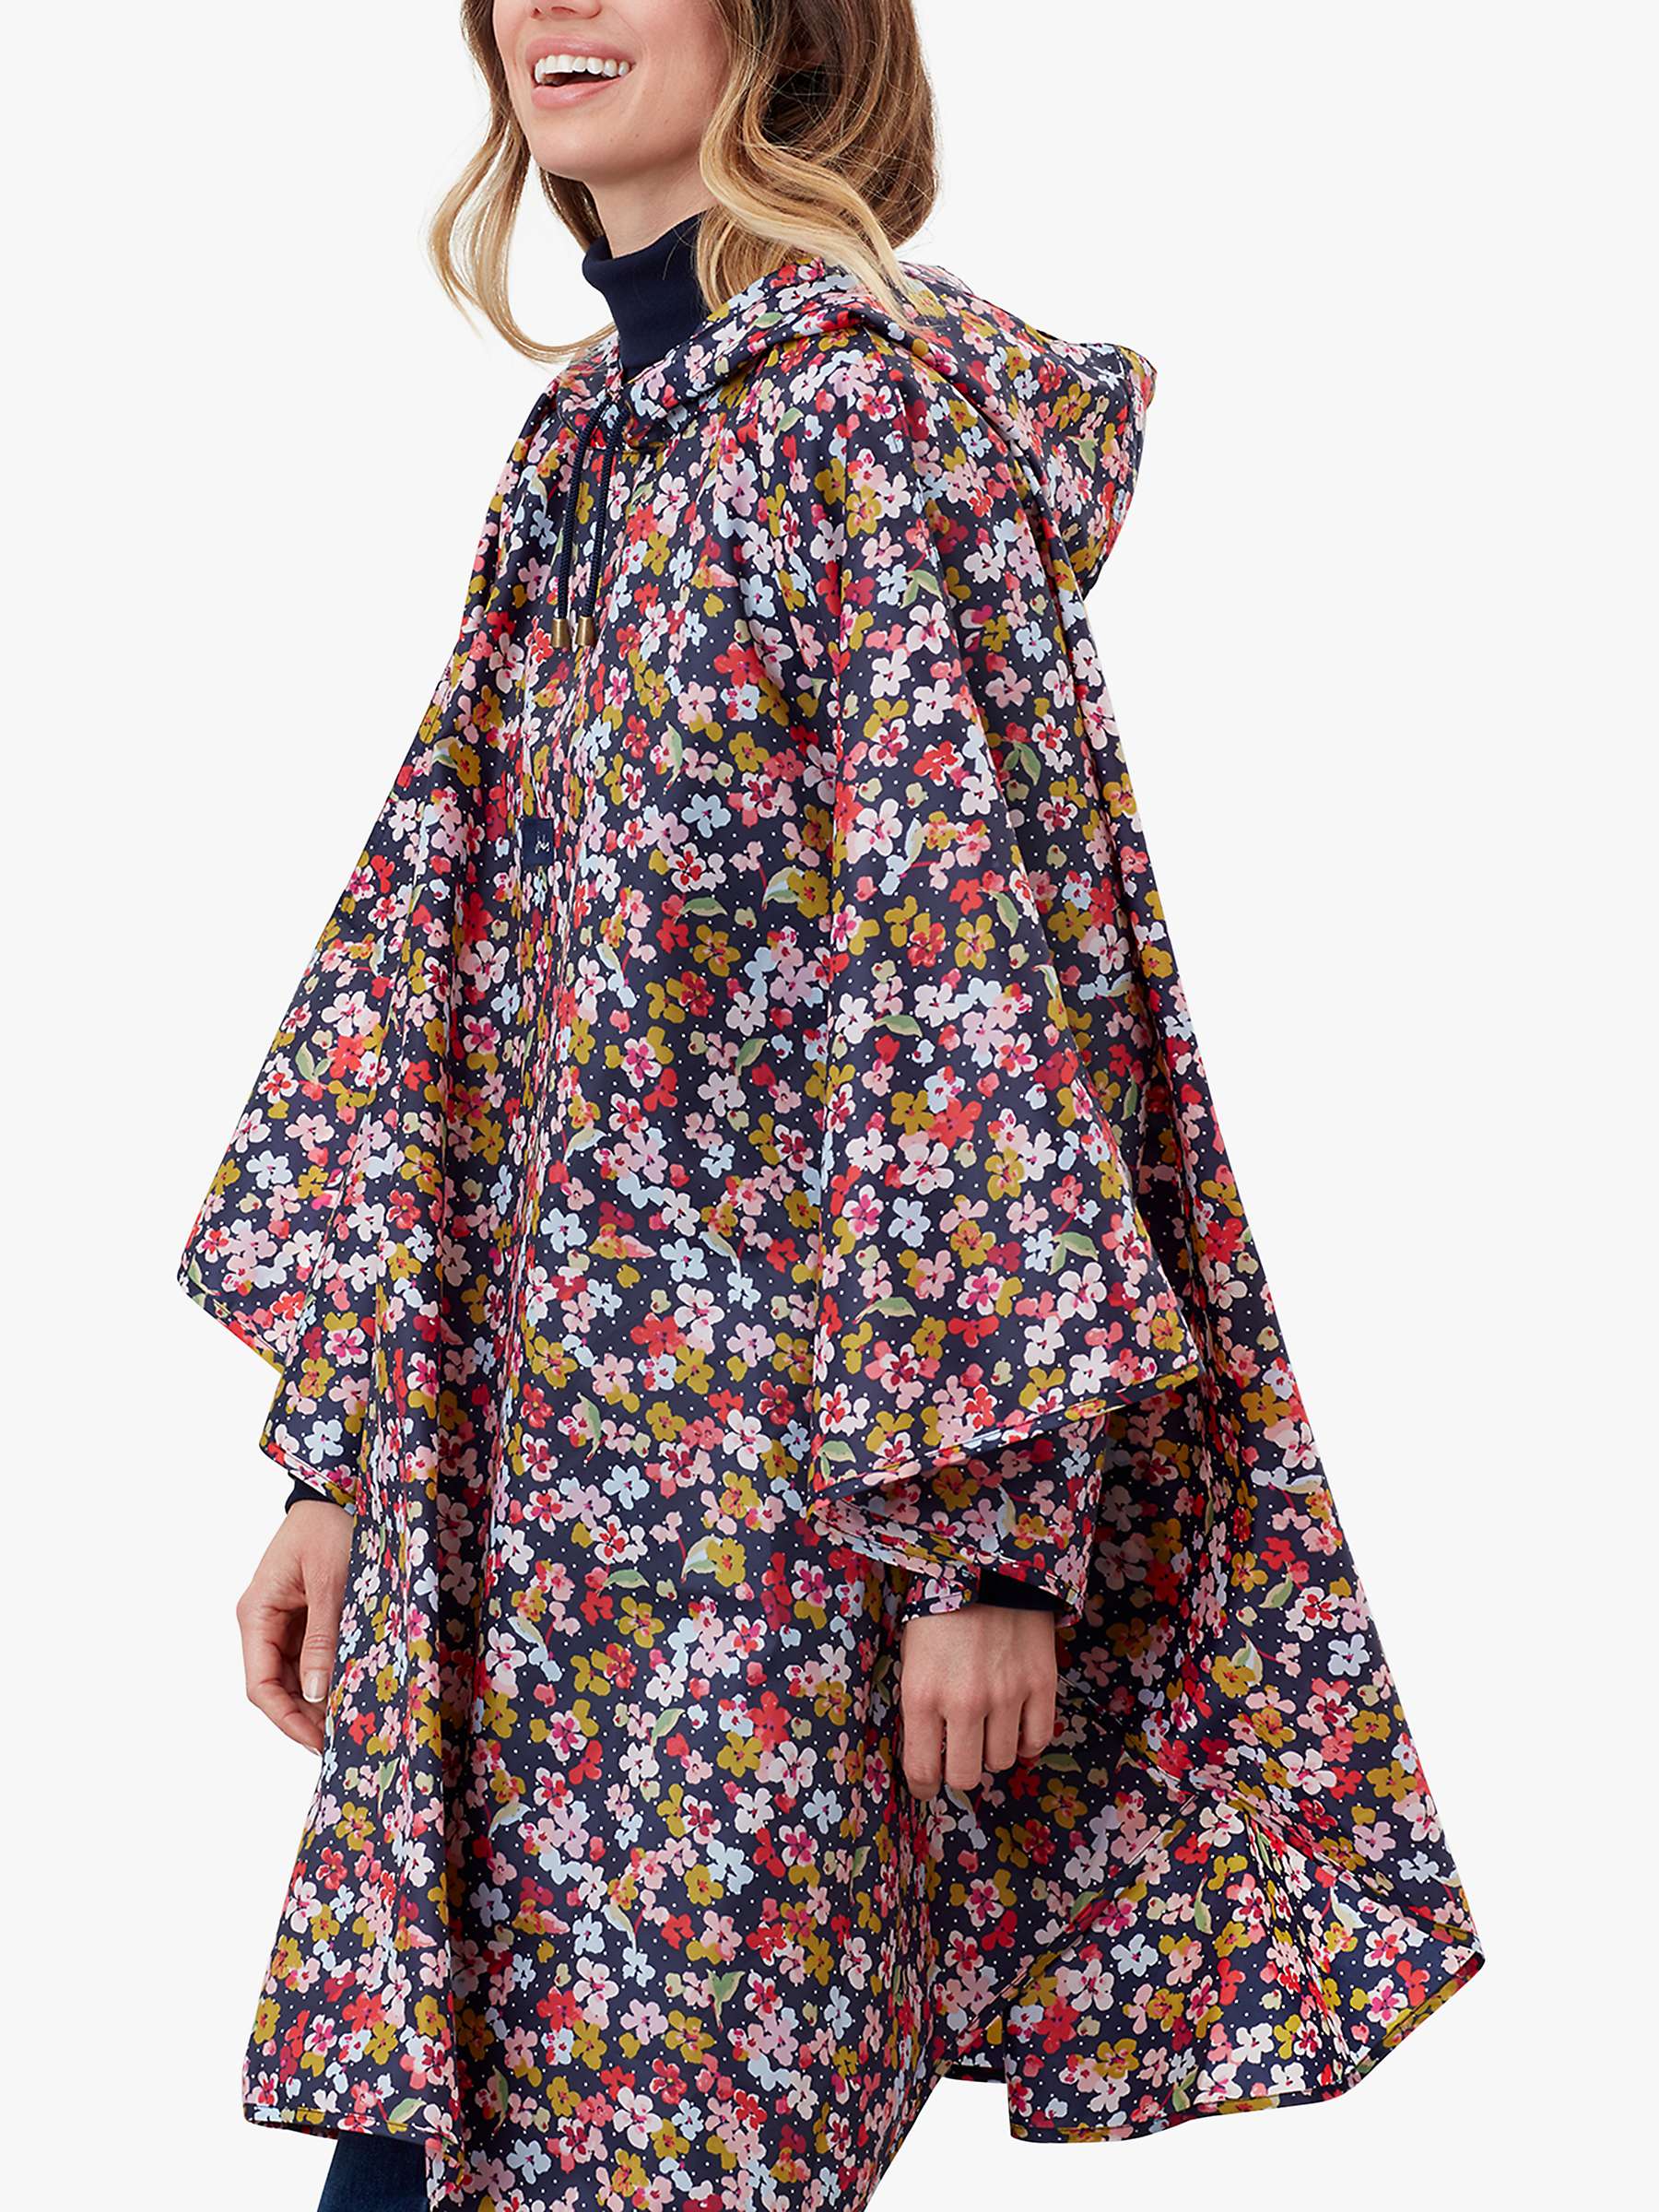 Joules Blossom Print Hooded Poncho, Navy/Multi at John Lewis & Partners